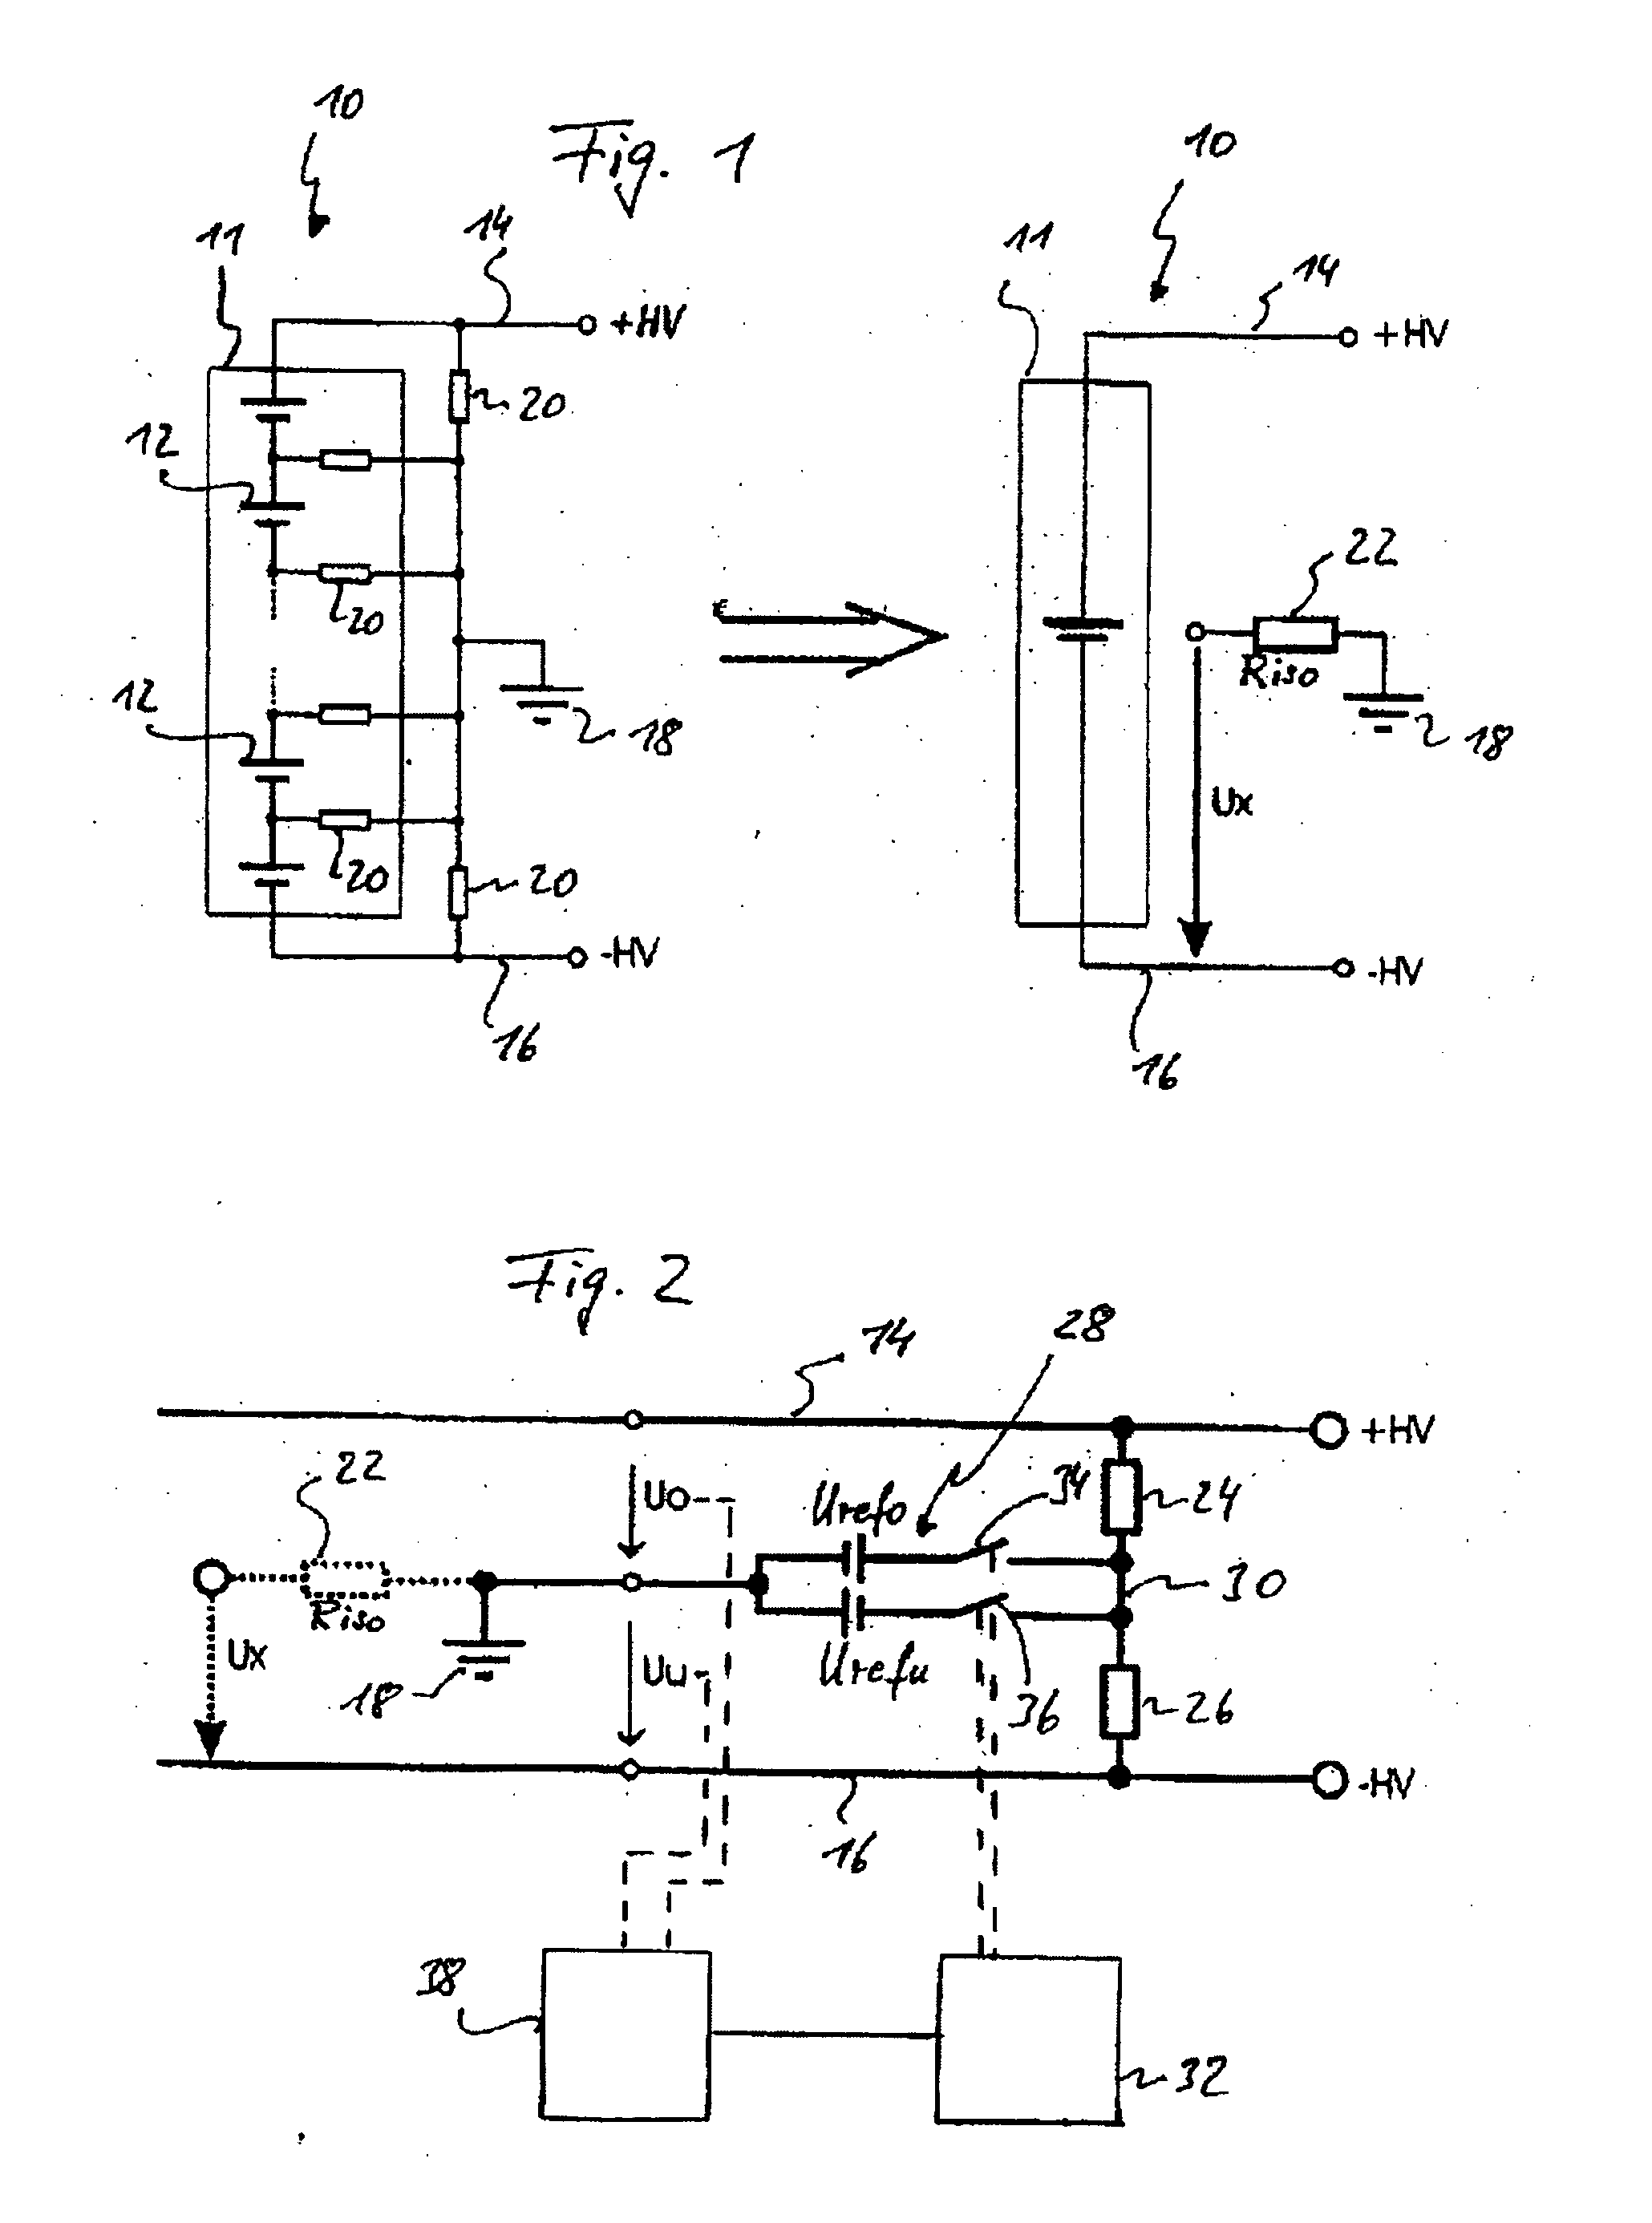 Apparatus and method for measuring the insulation resistance of a fuel cell system